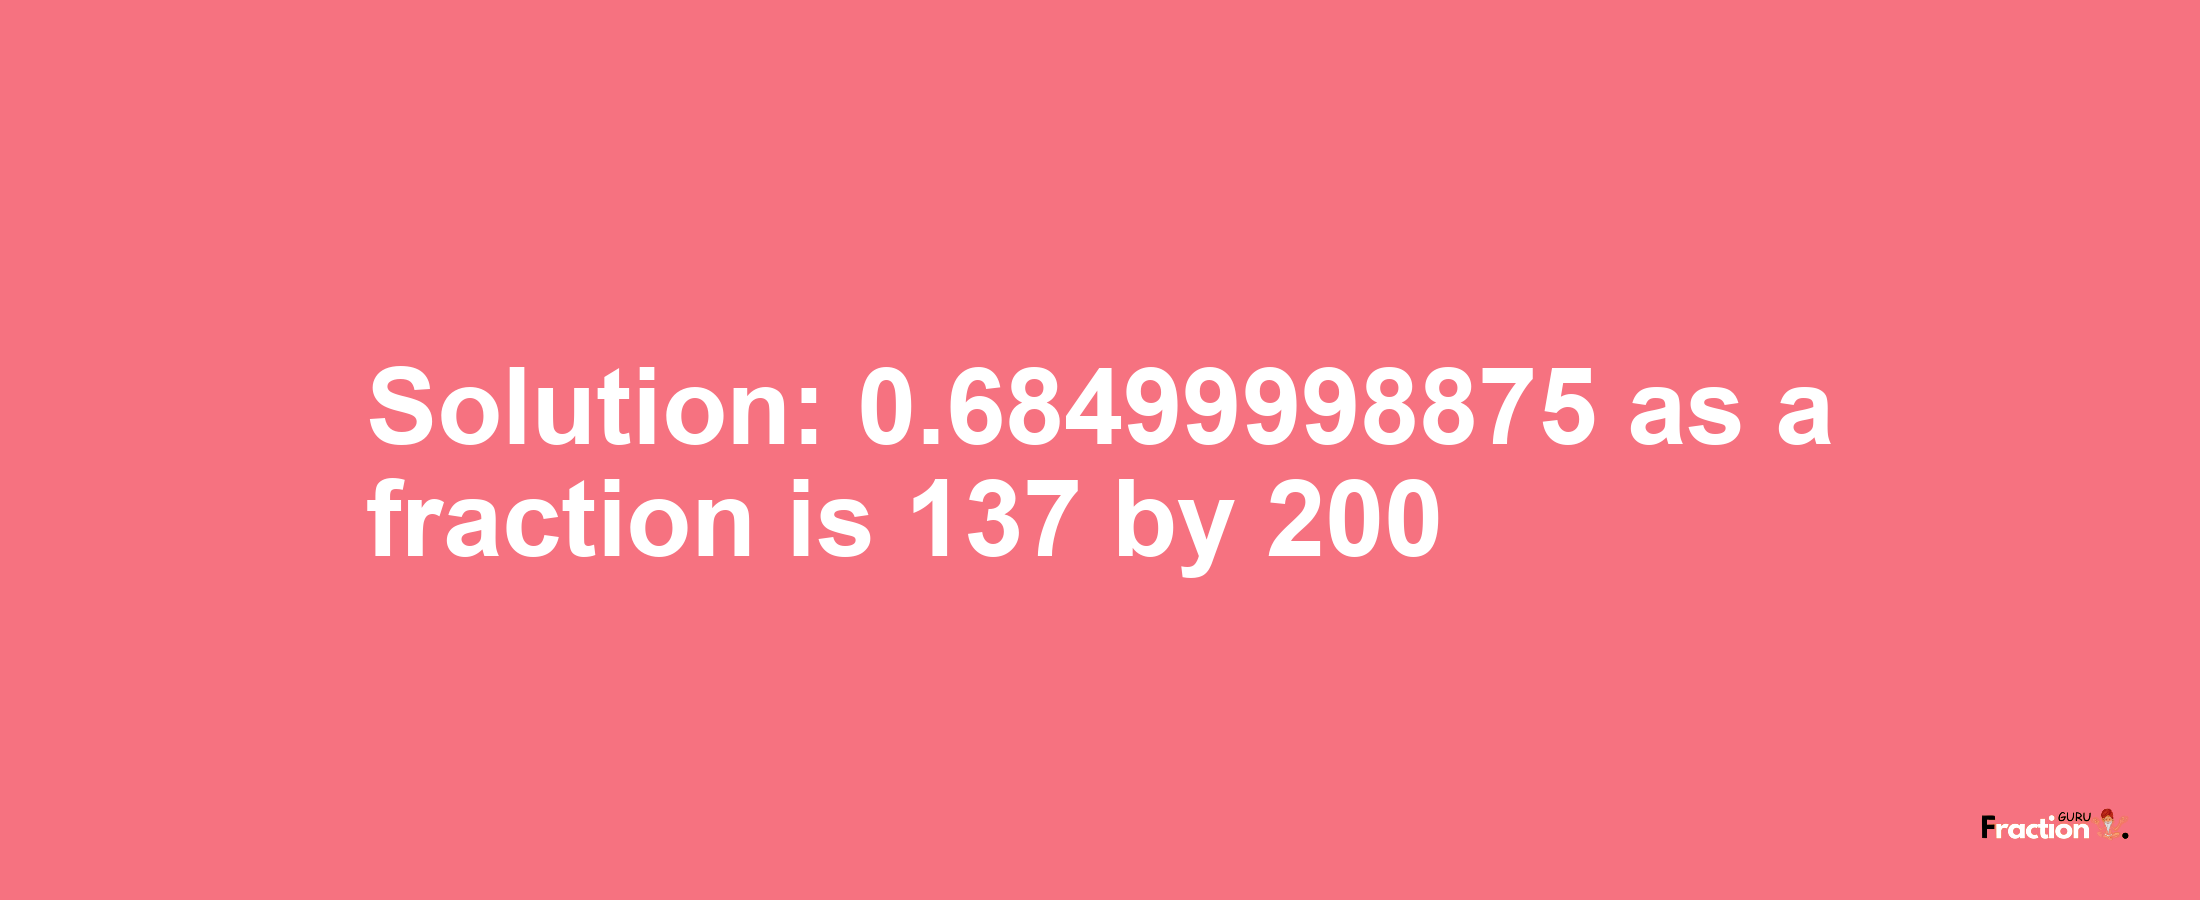 Solution:0.68499998875 as a fraction is 137/200